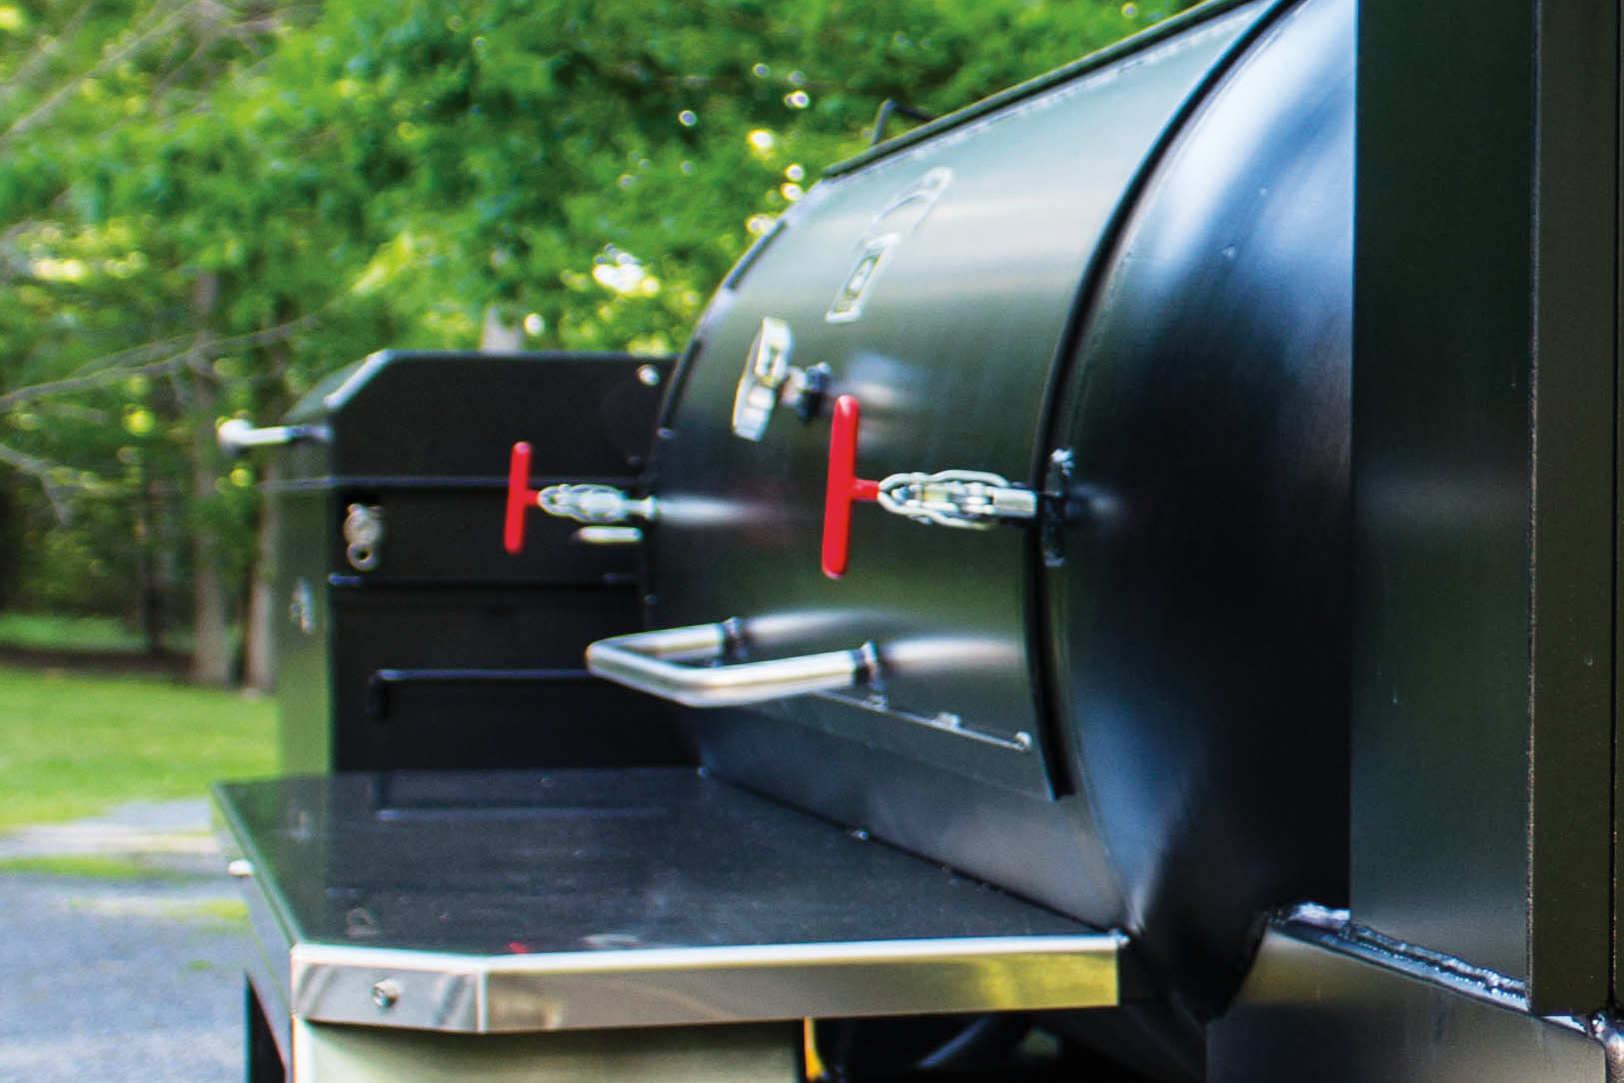 ThermoWorks Dot - Meadow Creek Barbecue Supply